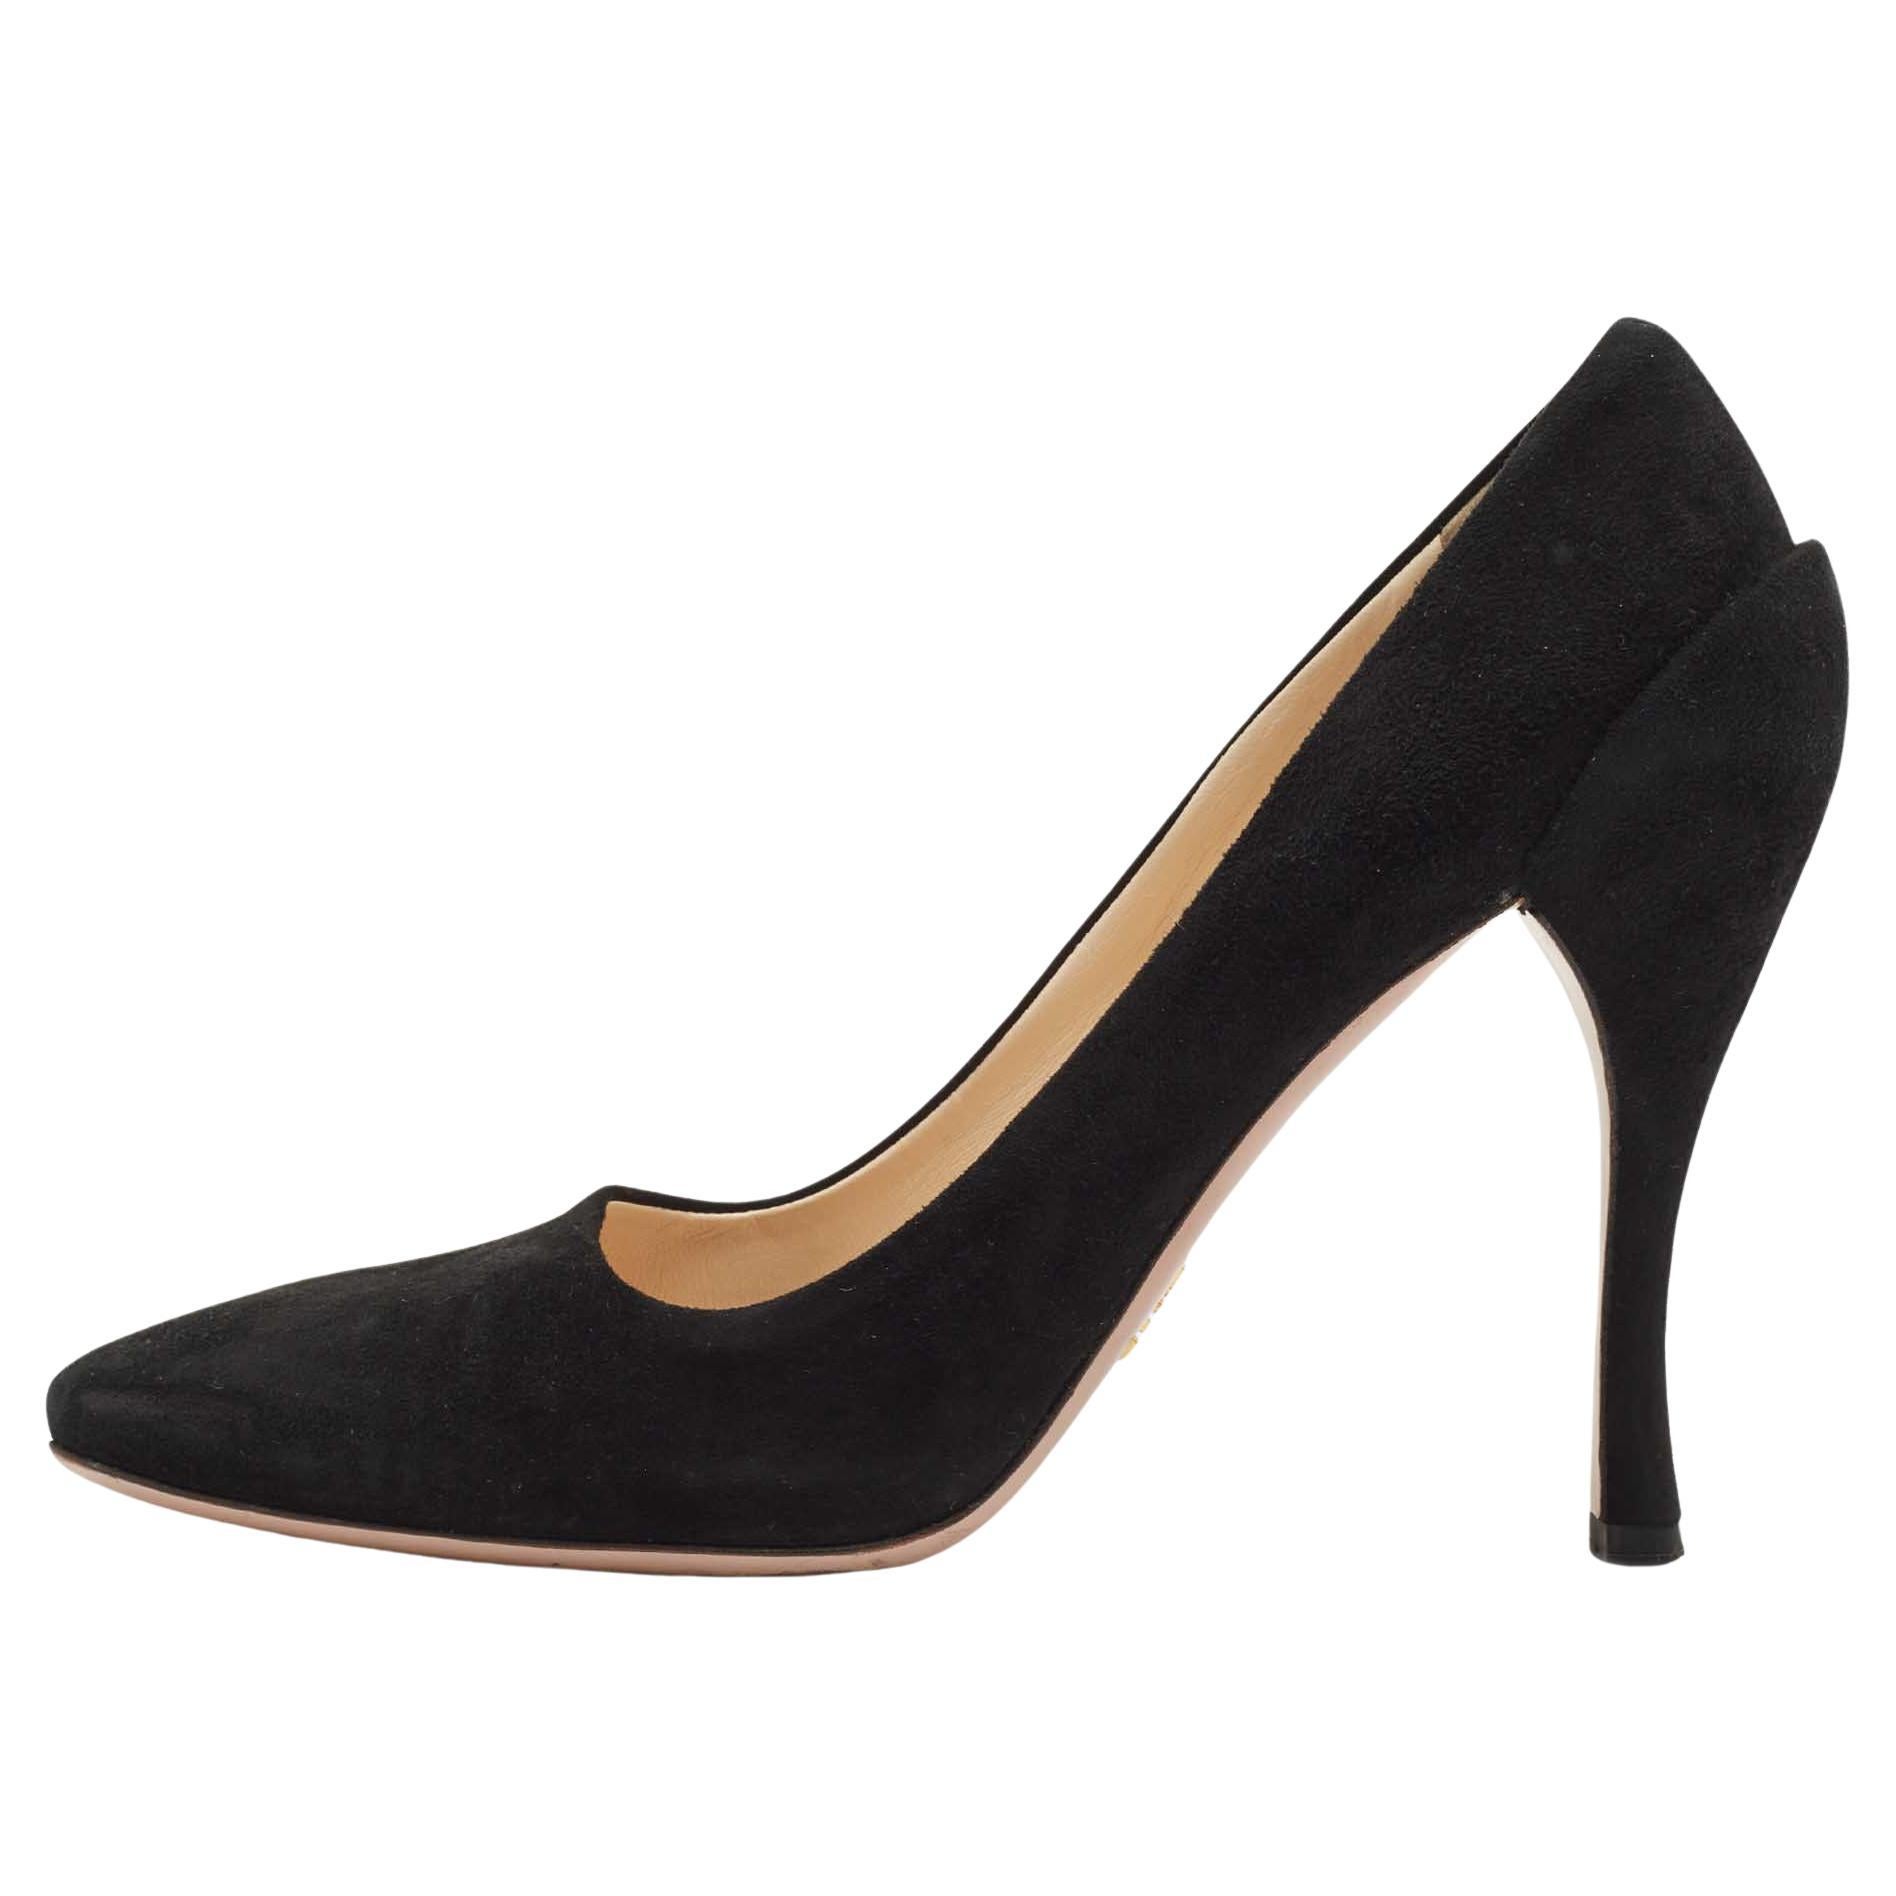 Prada Black Suede Pointed Toe Pumps Size 38.5 For Sale